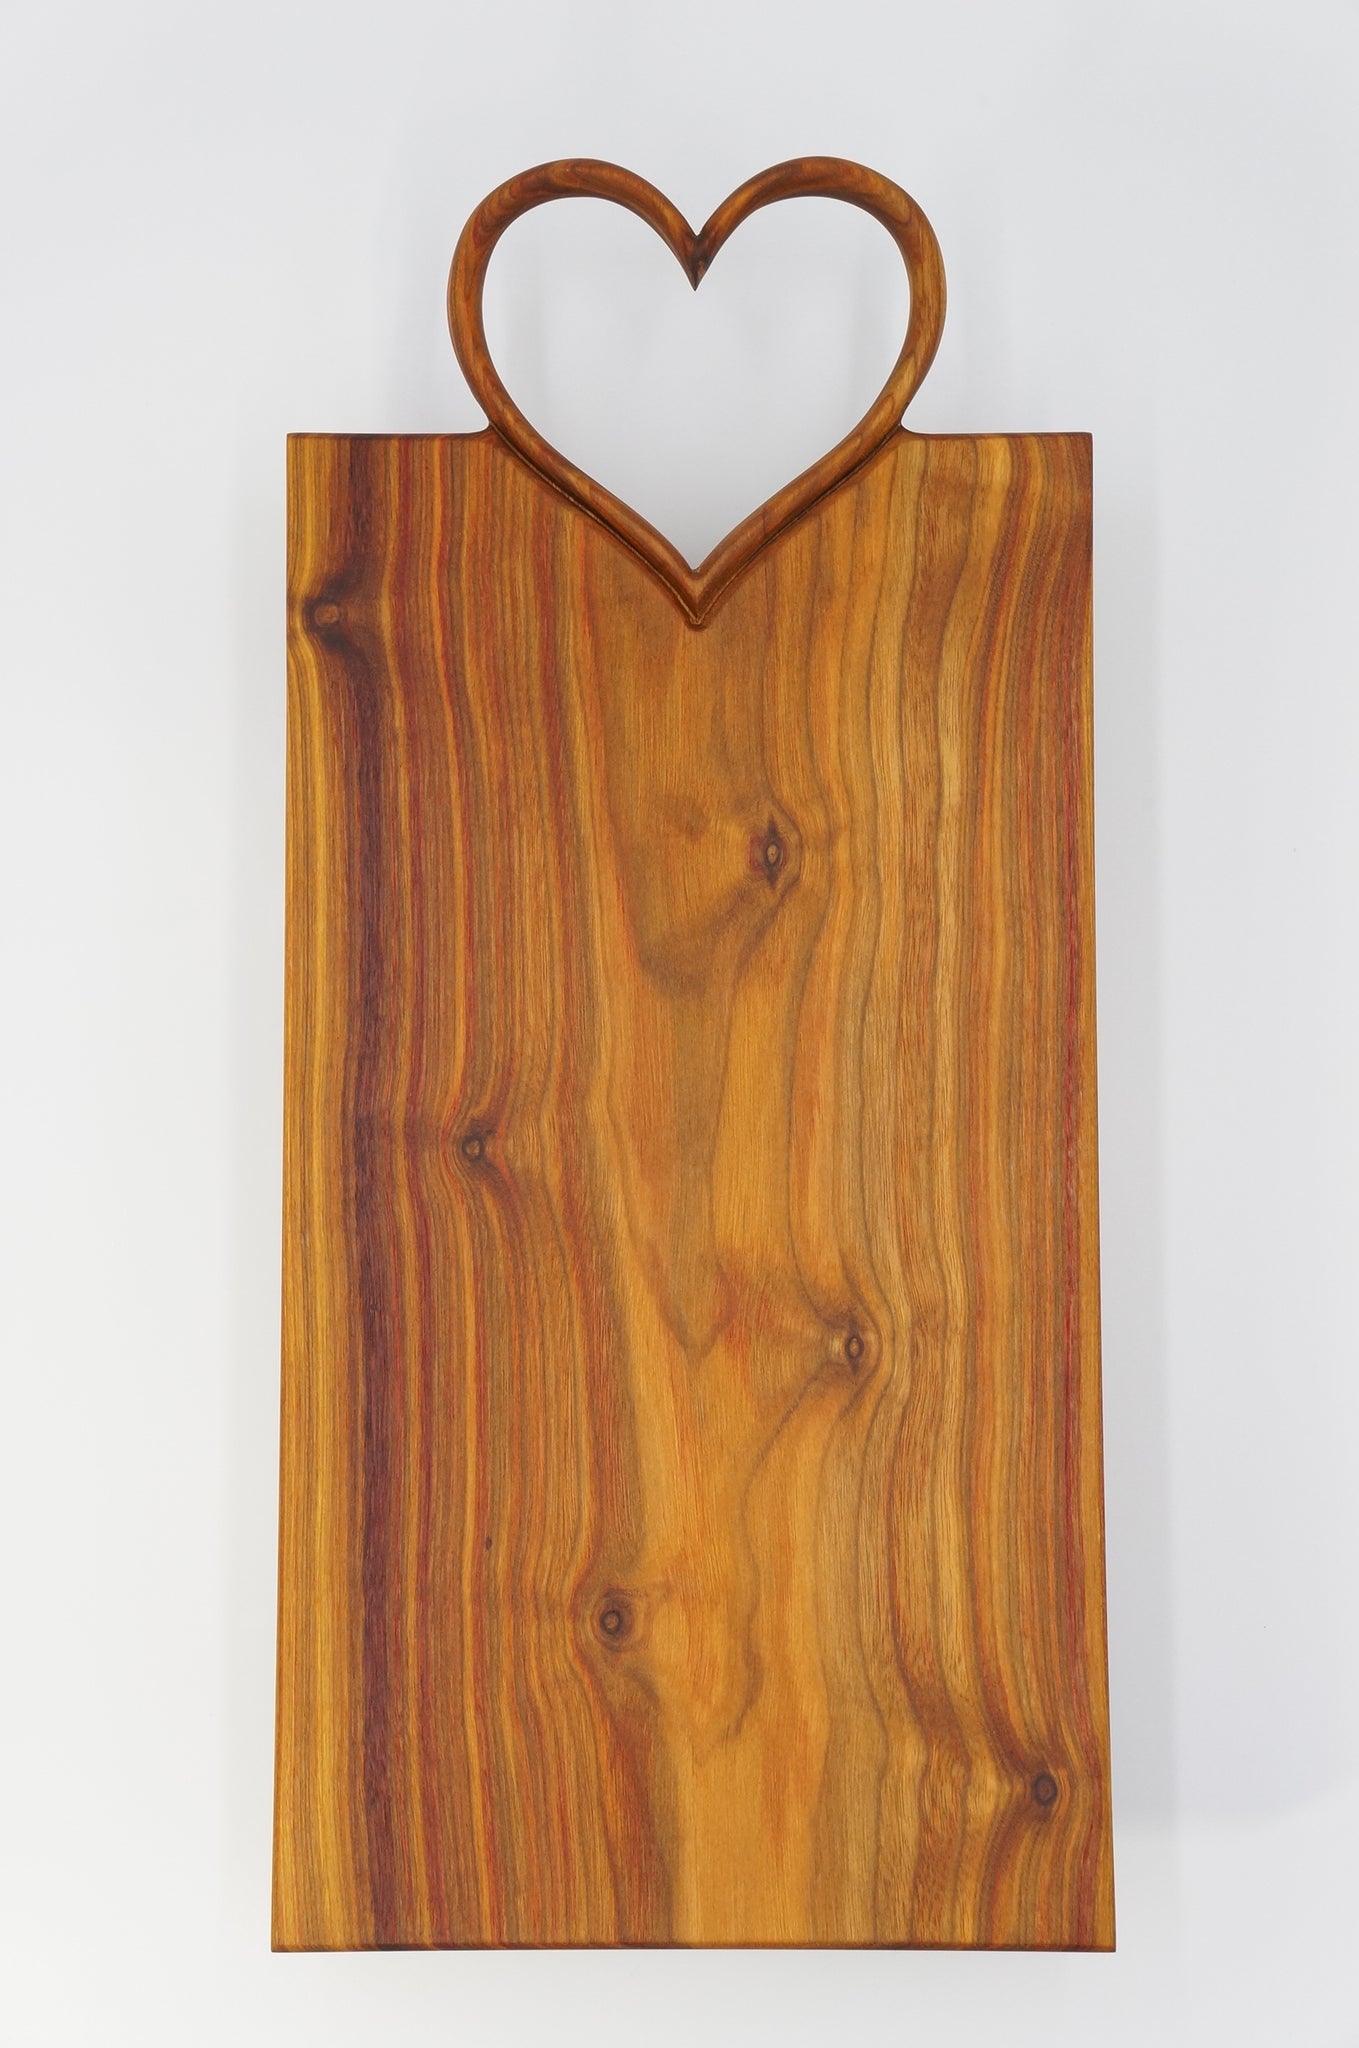 Canary Wood with Heart Handle Cutting Board